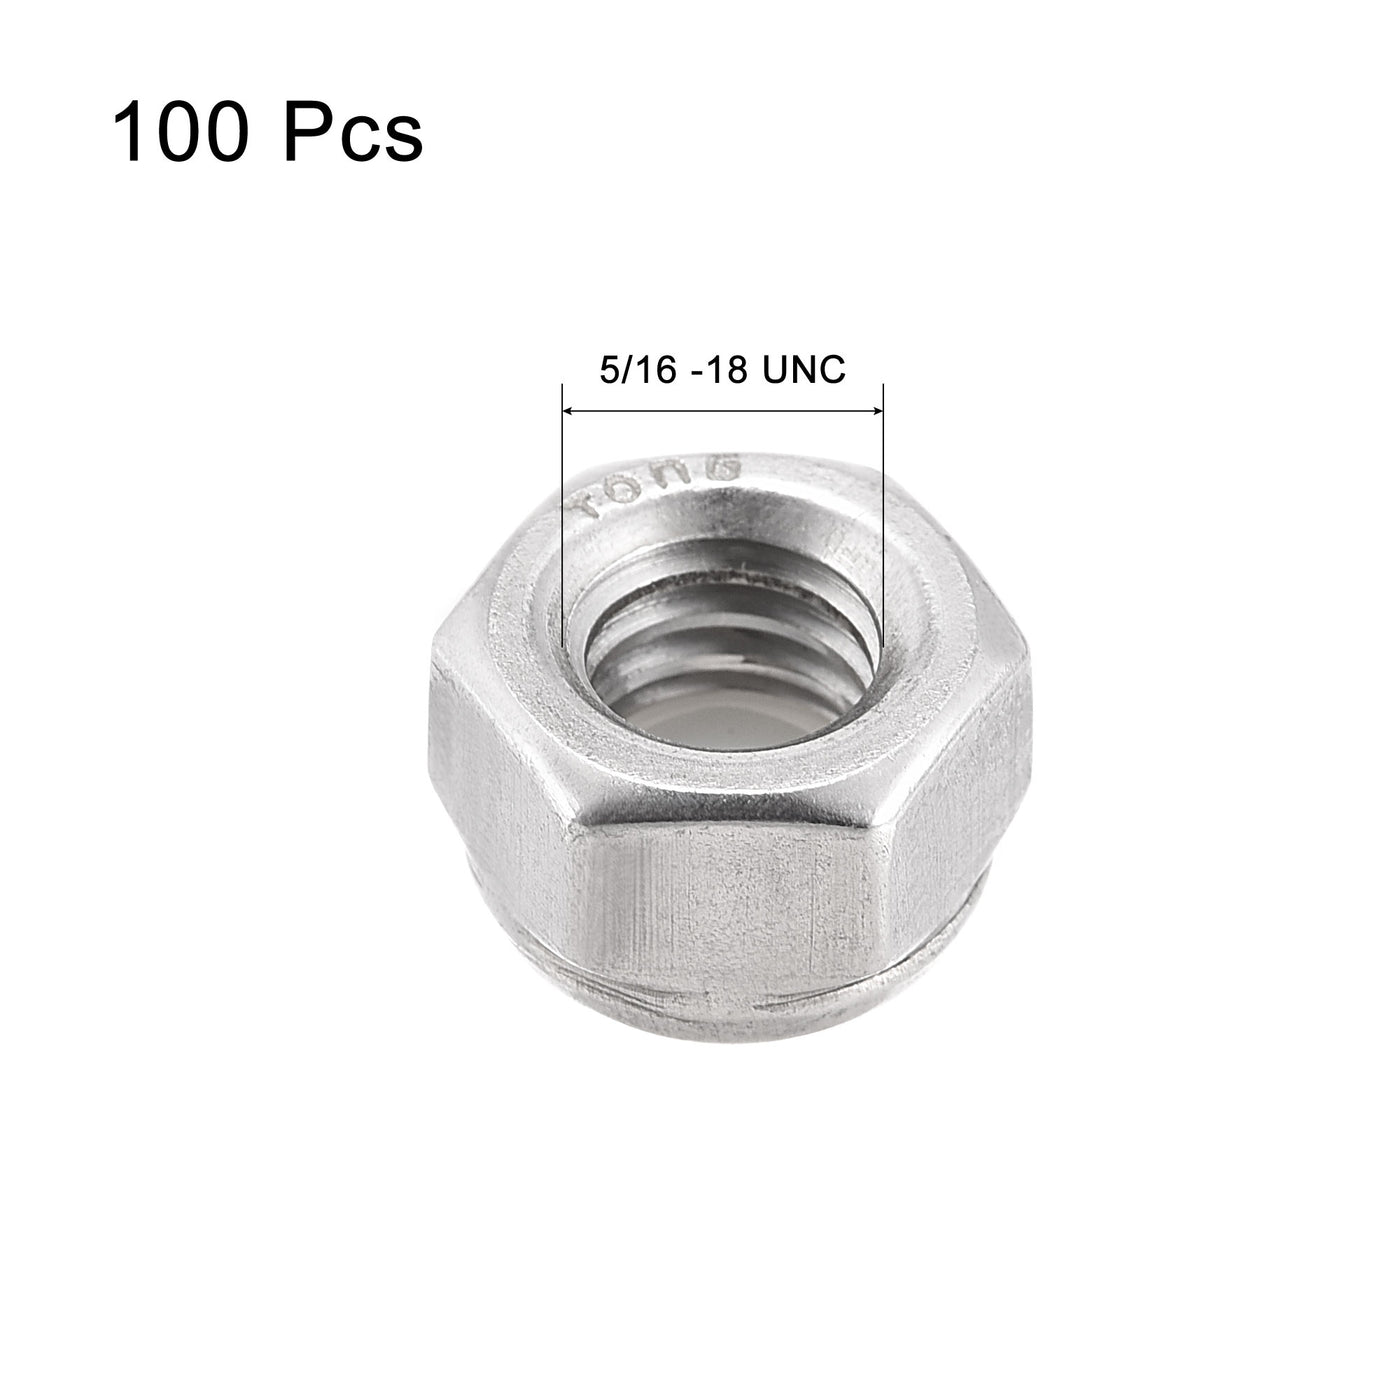 Uxcell Uxcell 5/16-18 UNC Nylon Insert Hex Lock Nuts, 304 Stainless Steel, Plain Finish 100pcs